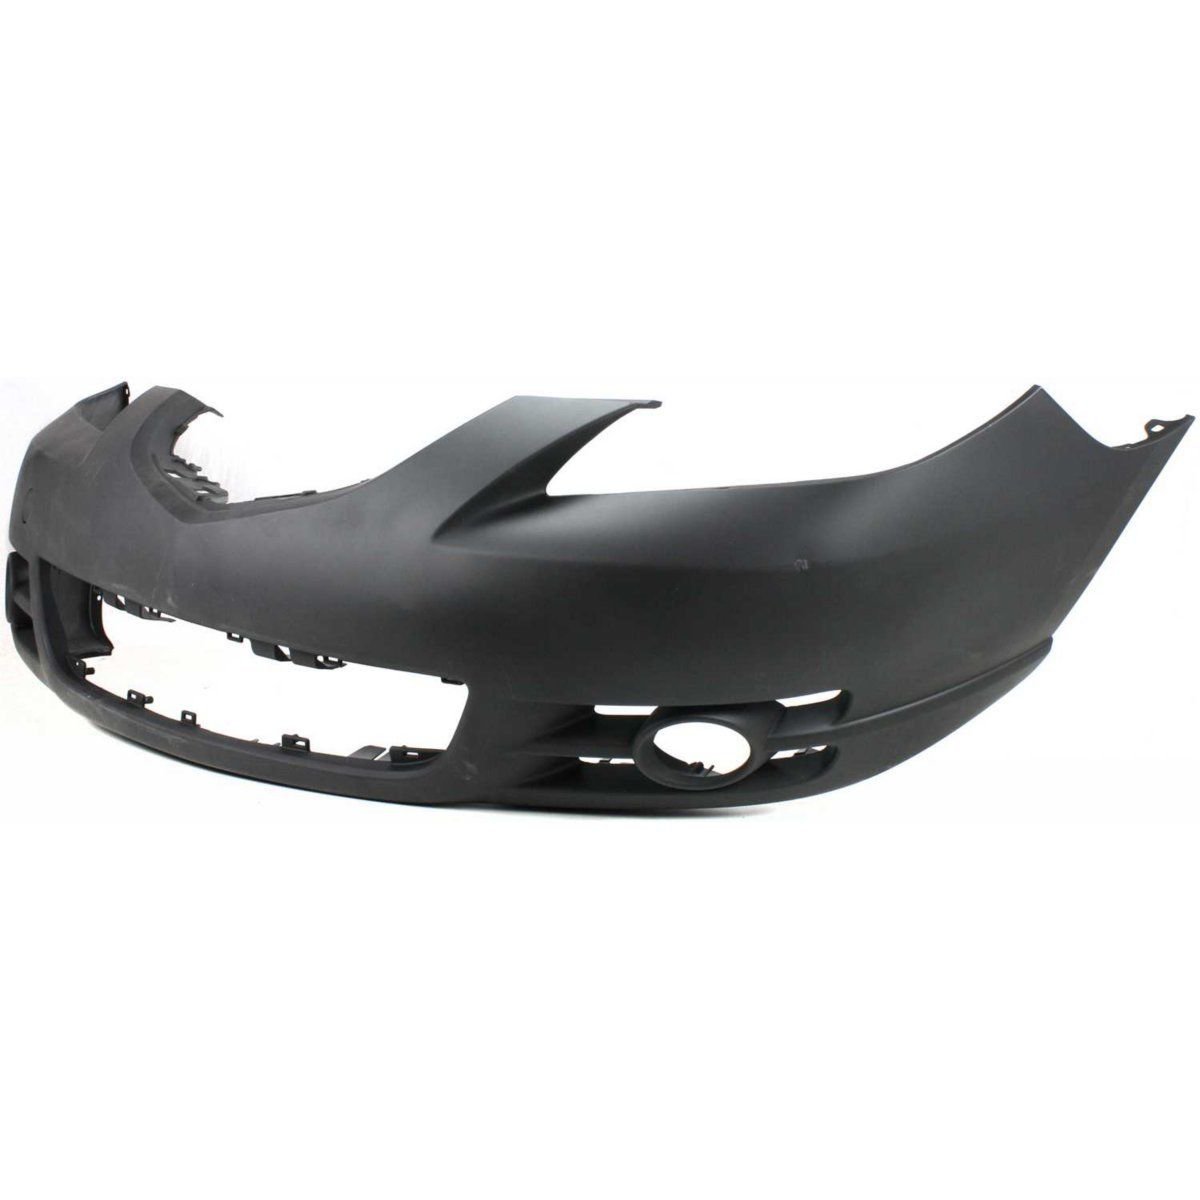 2004-2006 MAZDA 3 Front Bumper Cover Sedan  Sport Type  w/Fog Lamps Painted to Match